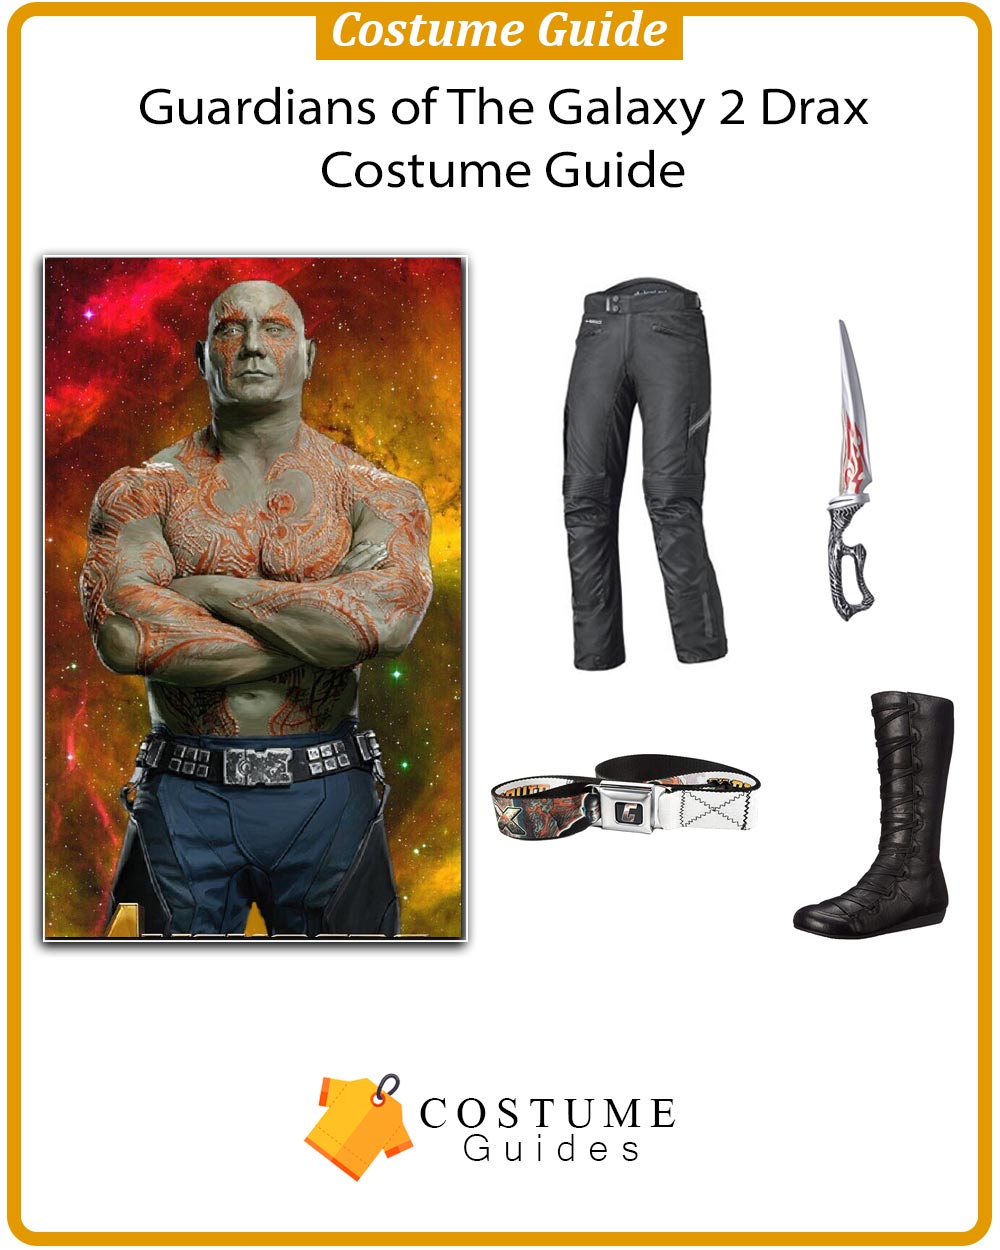 Drax Guardians of The Galaxy 2 Costume Guide